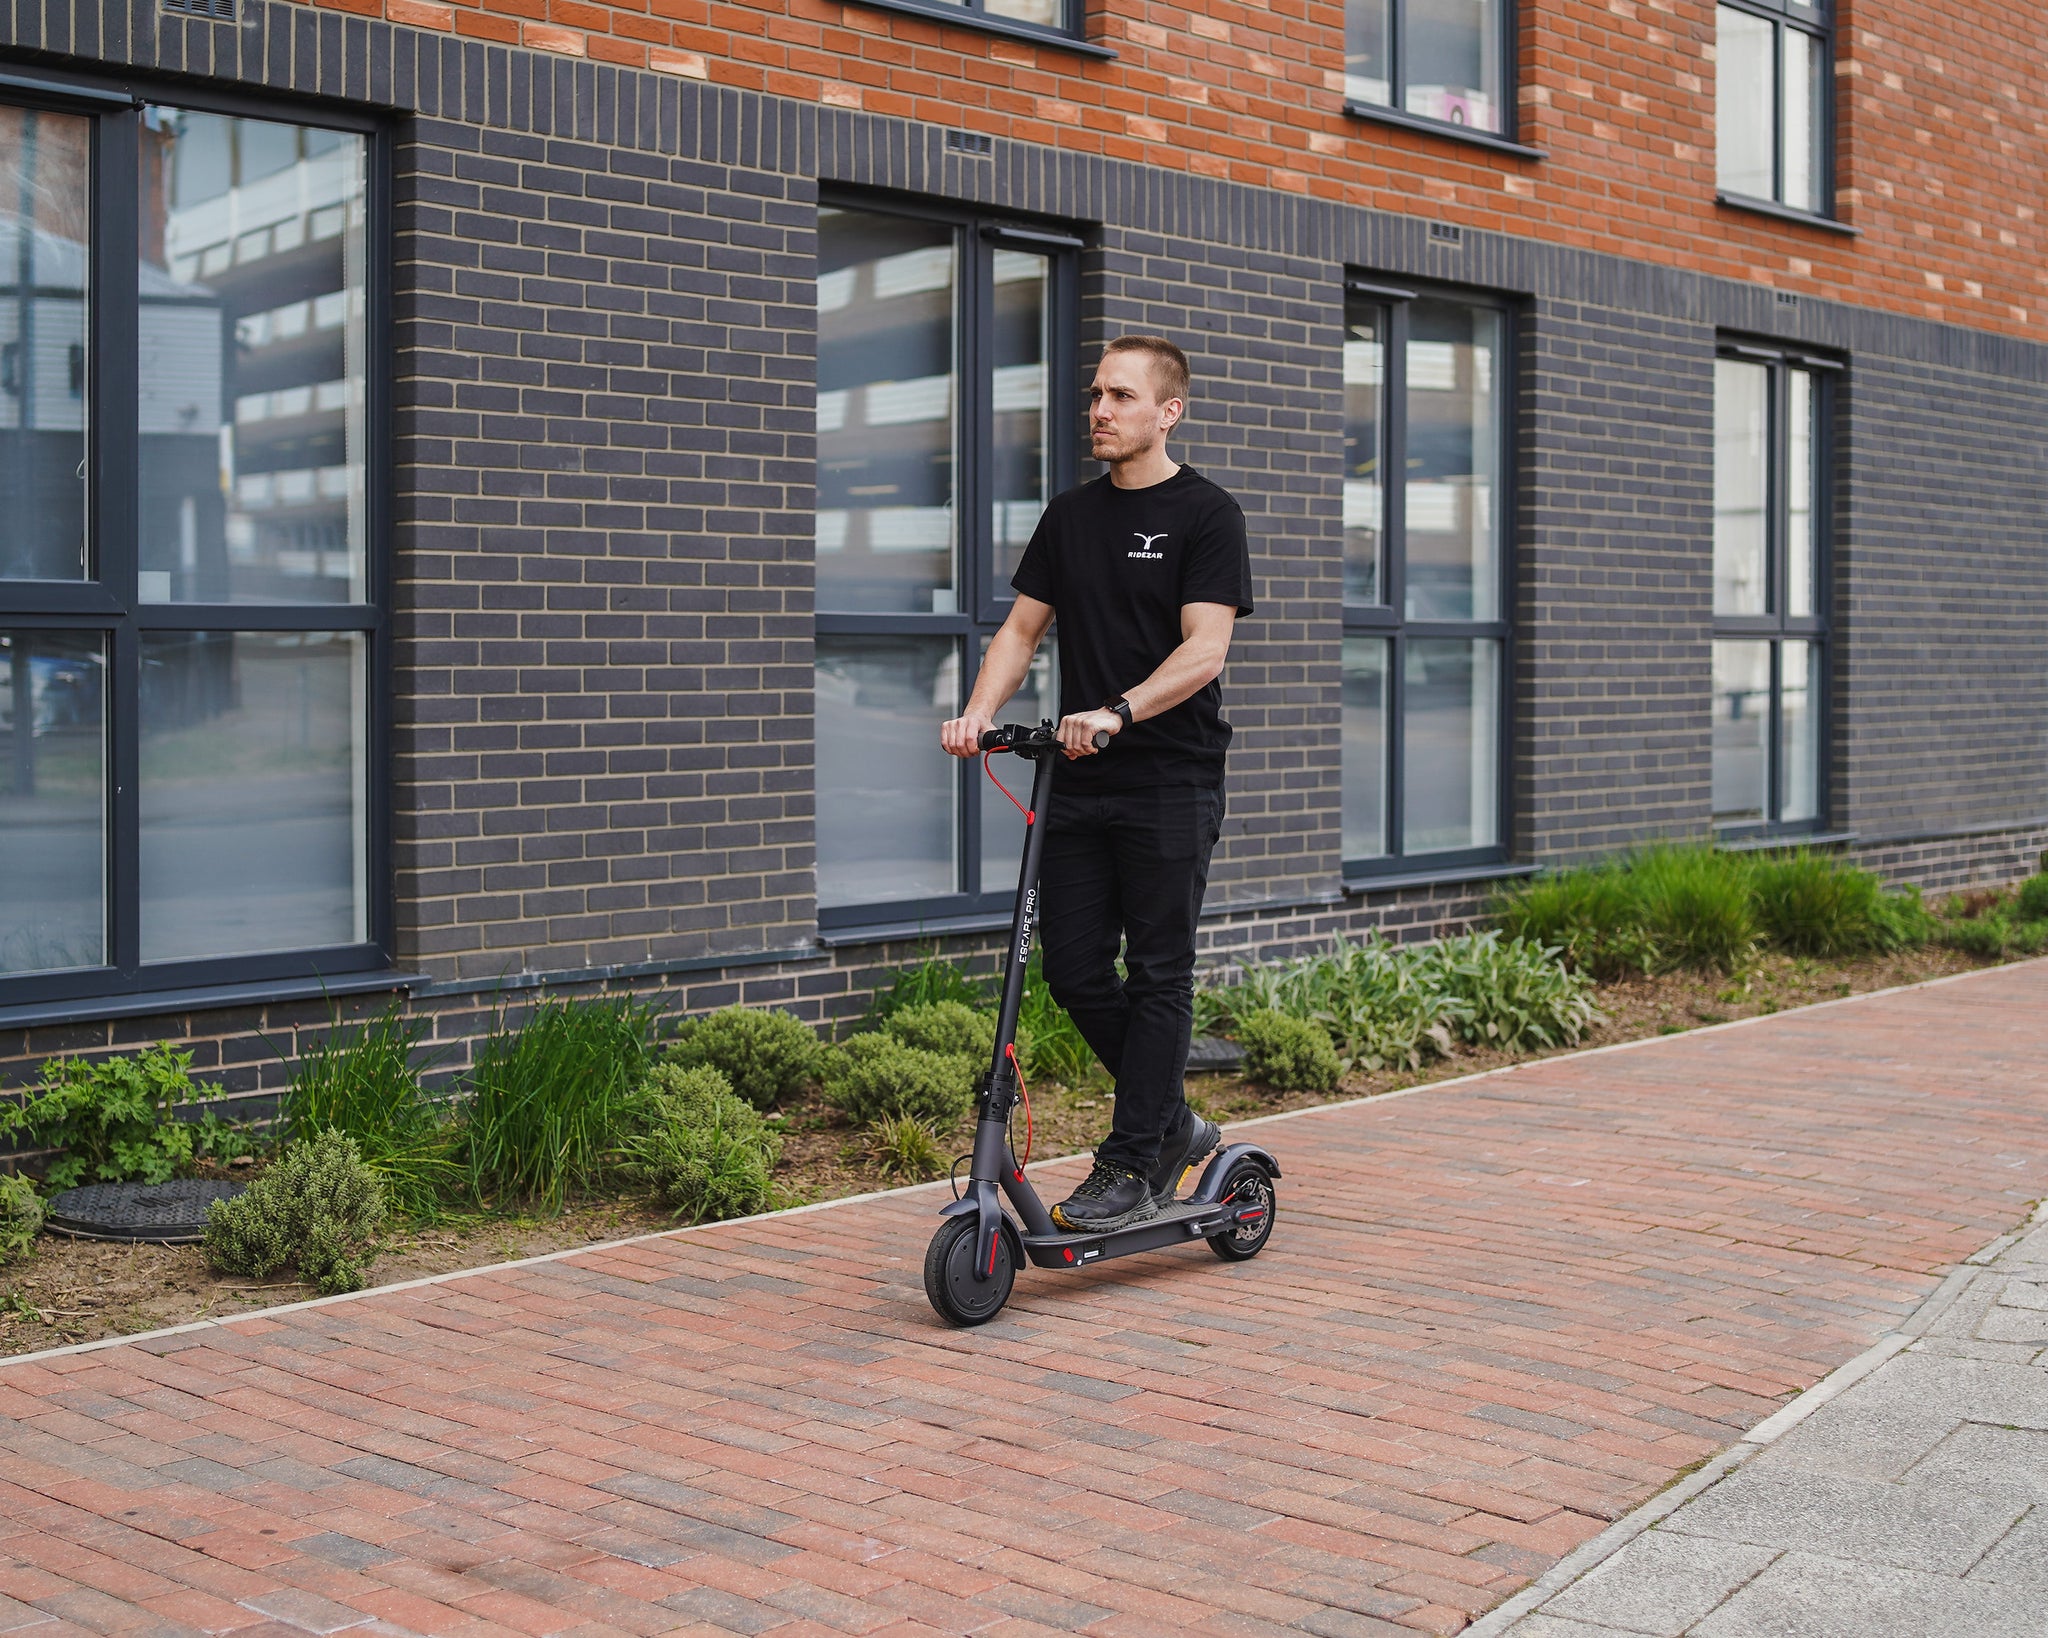 The UK's Escape Pro 2 Electric Scooter | Beginner Tutorial